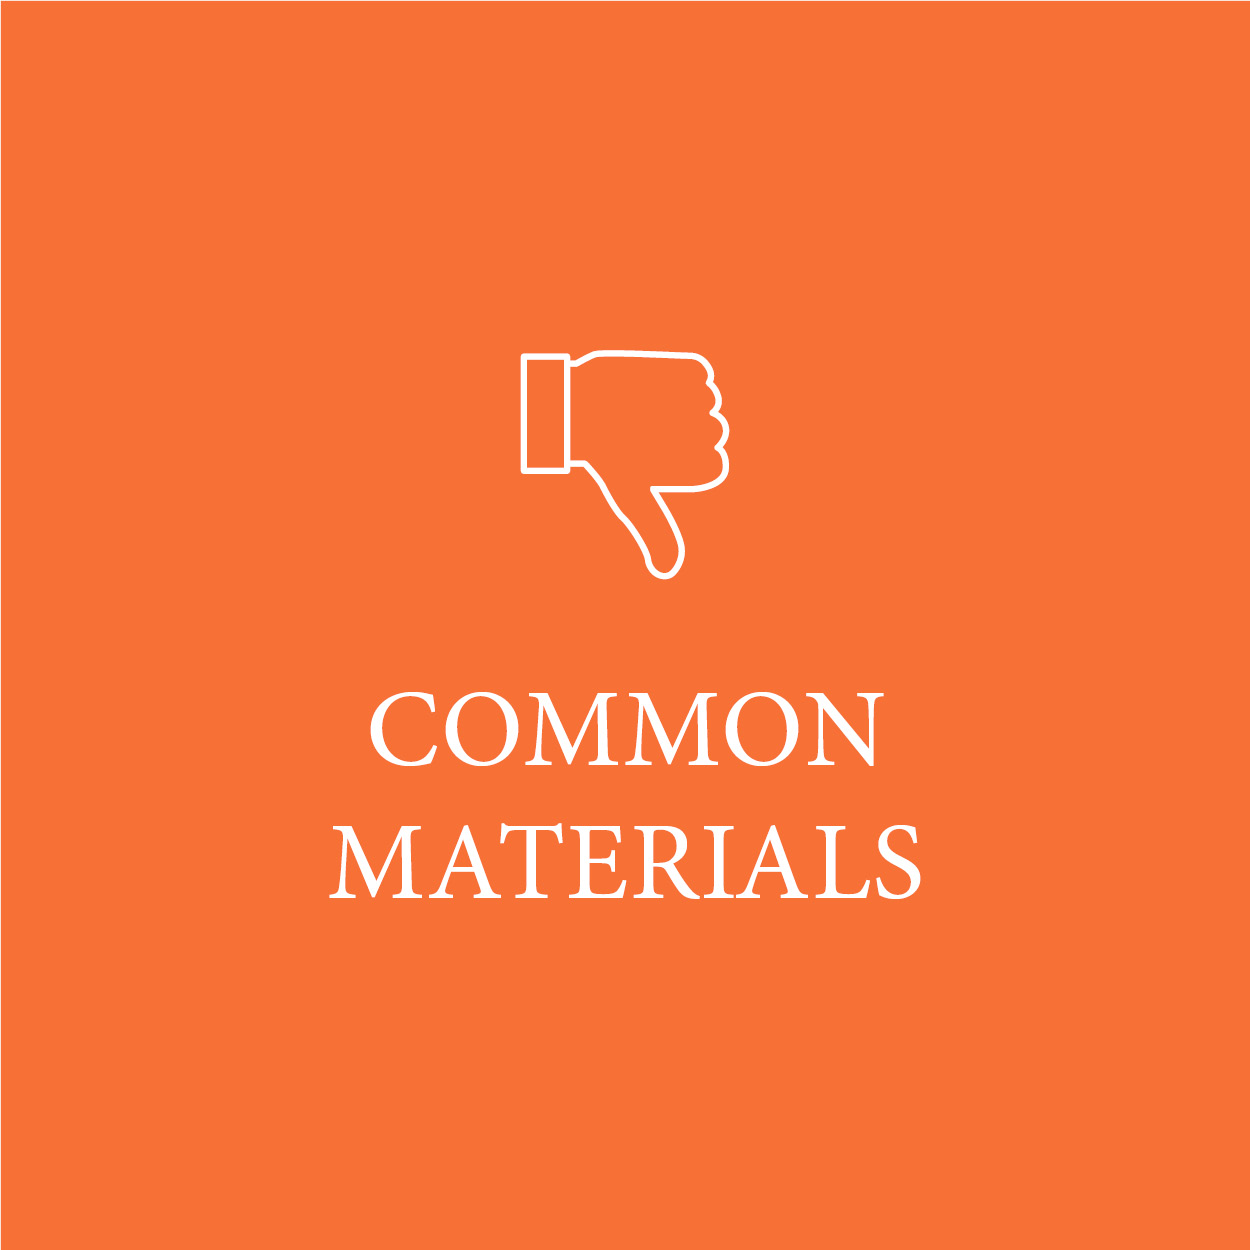 which of the following best describes the materials the company uses to make its footwear